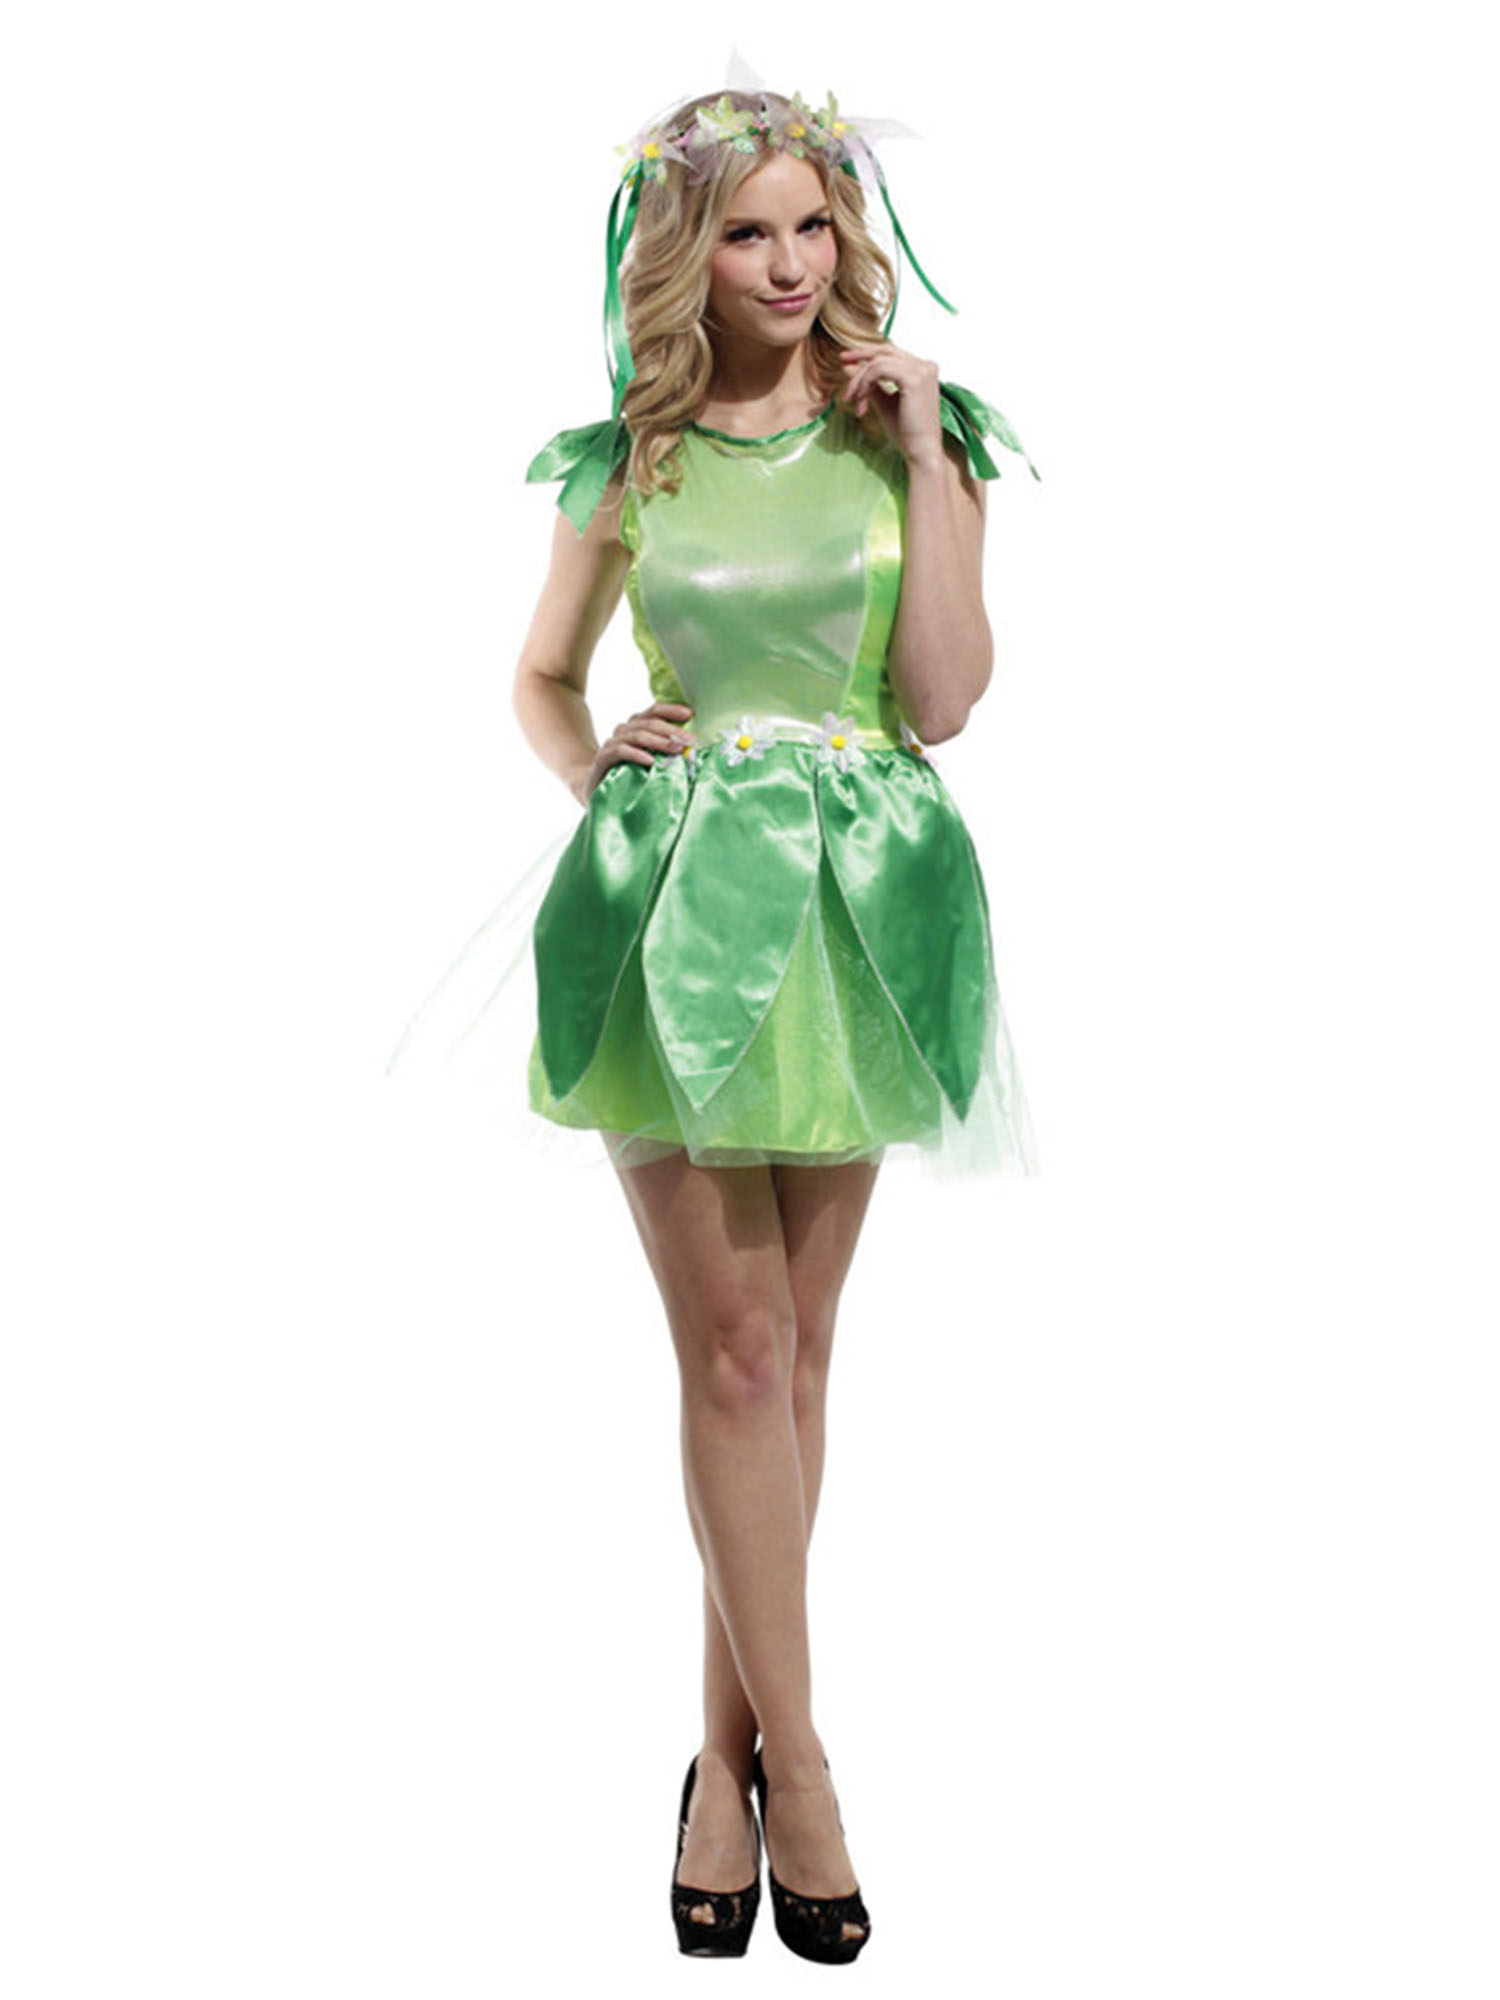 Special Occasion or Event Dress Women/'s Fairy Dress Adult Costume Boho Clothing